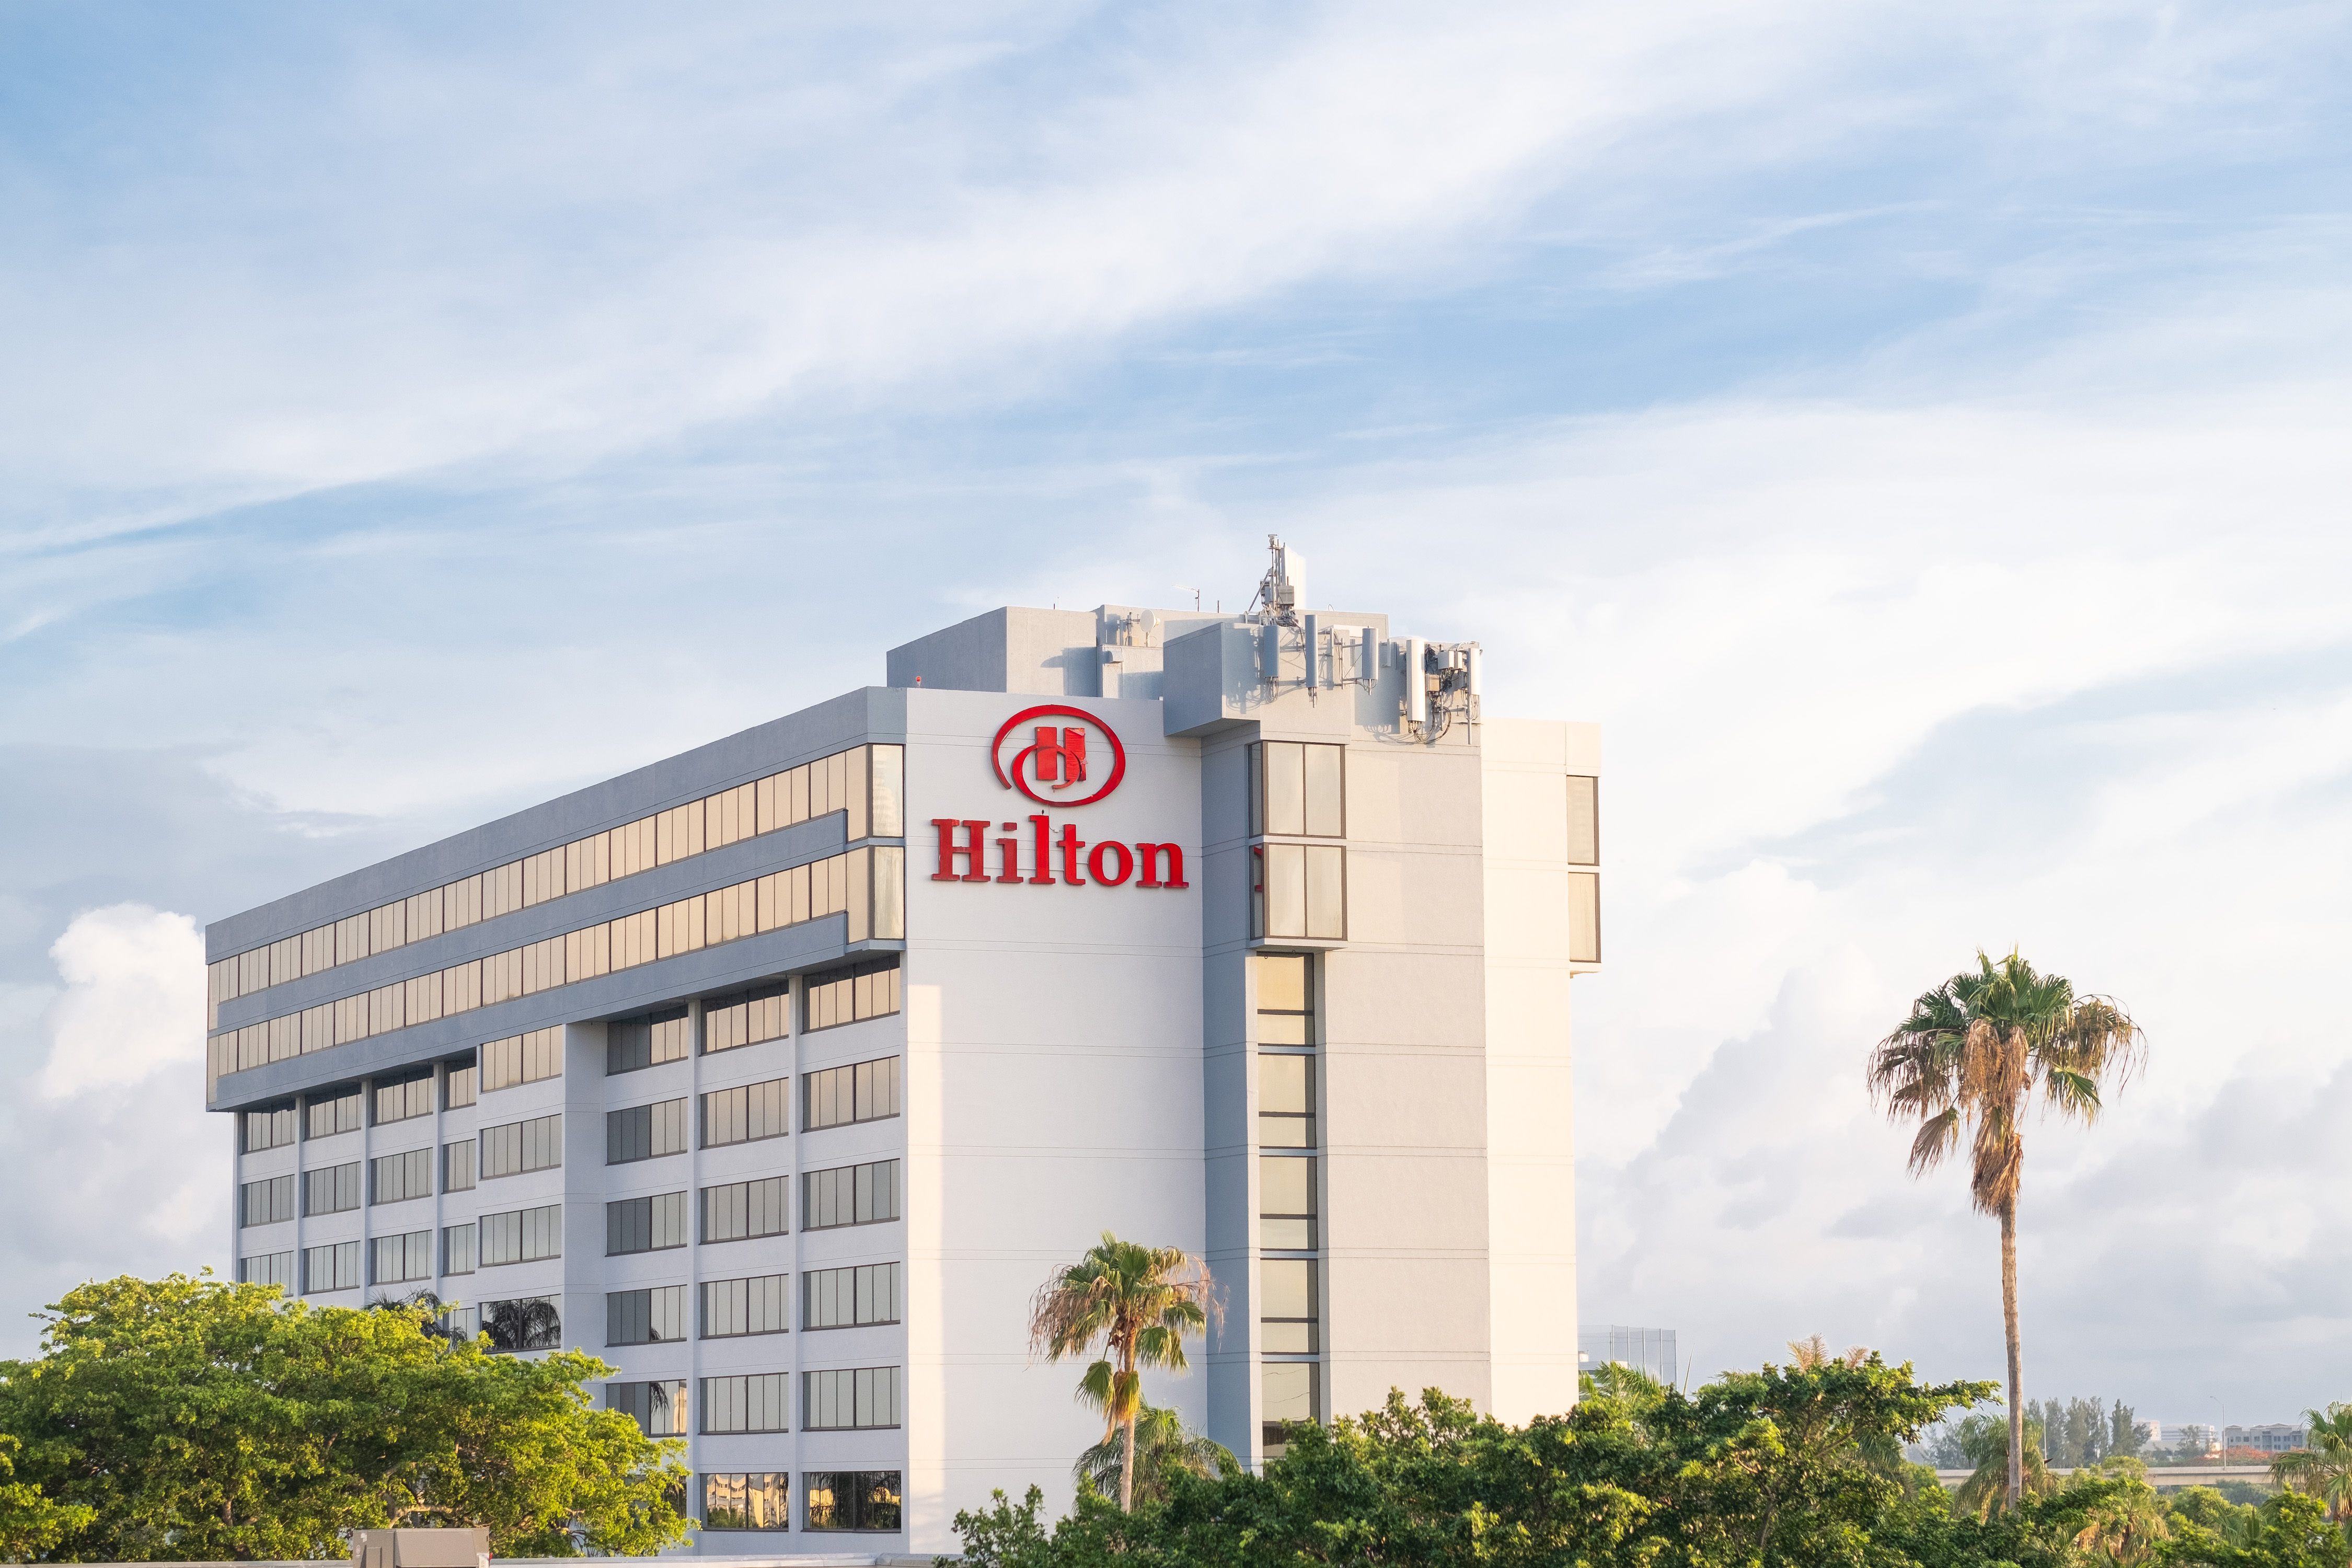 Side View of Hilton Hotel Exterior